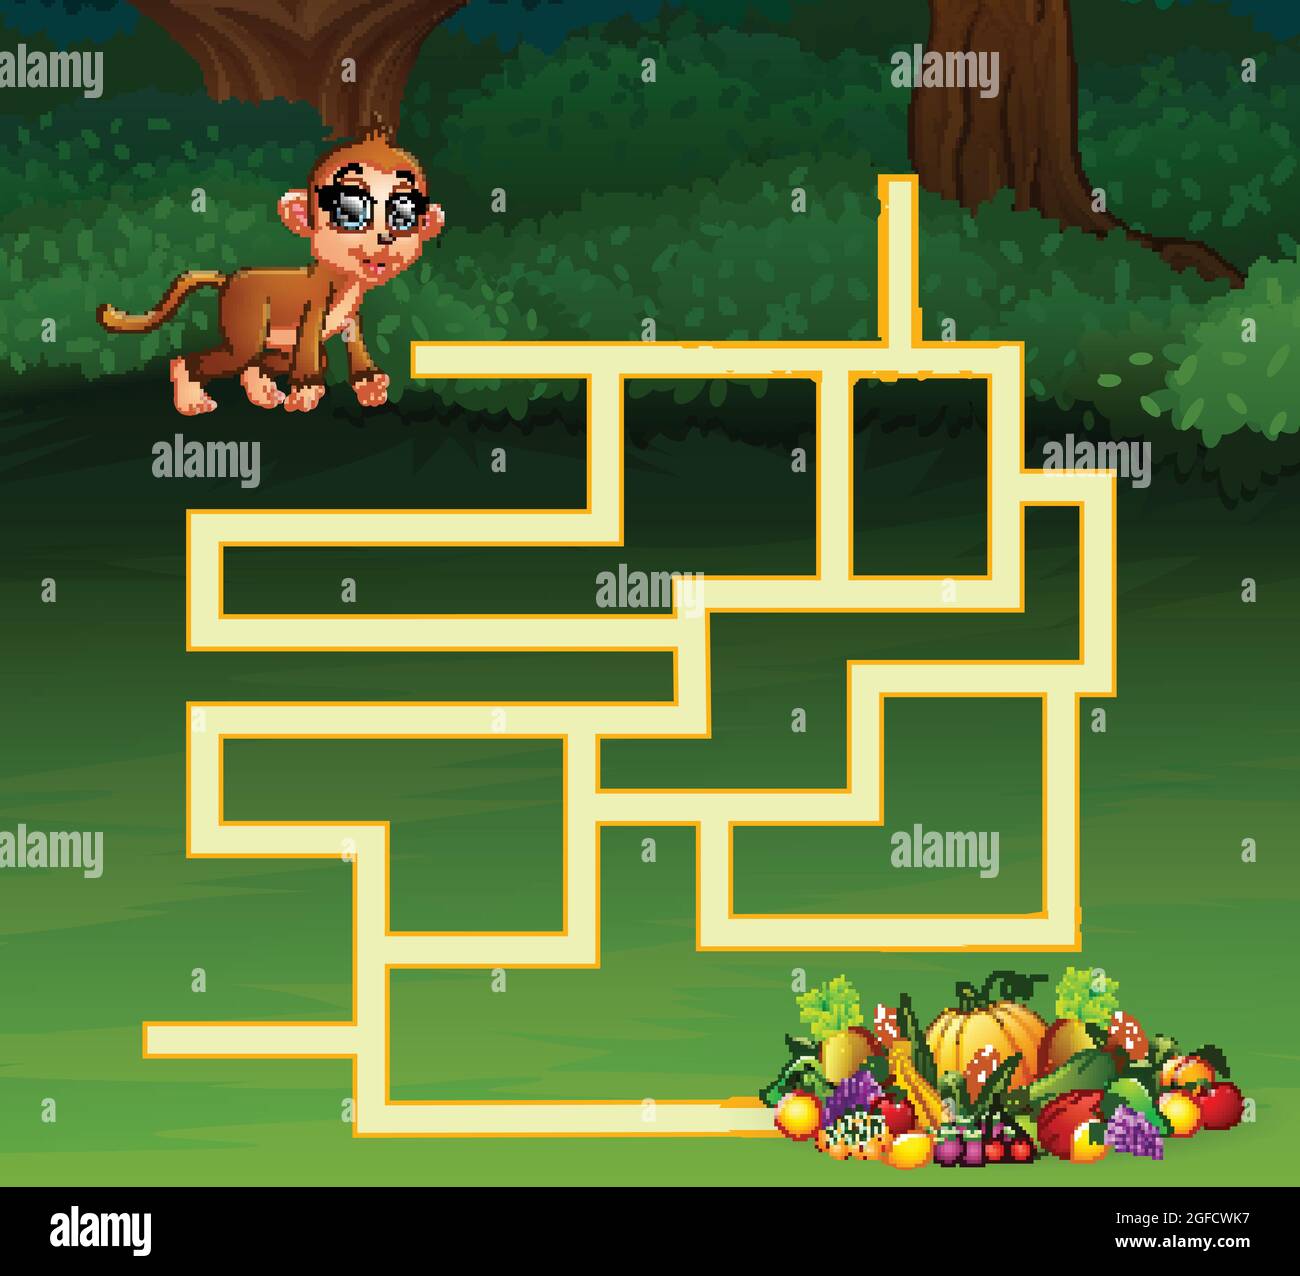 Game monkey maze find their way to the fruit Stock Vector